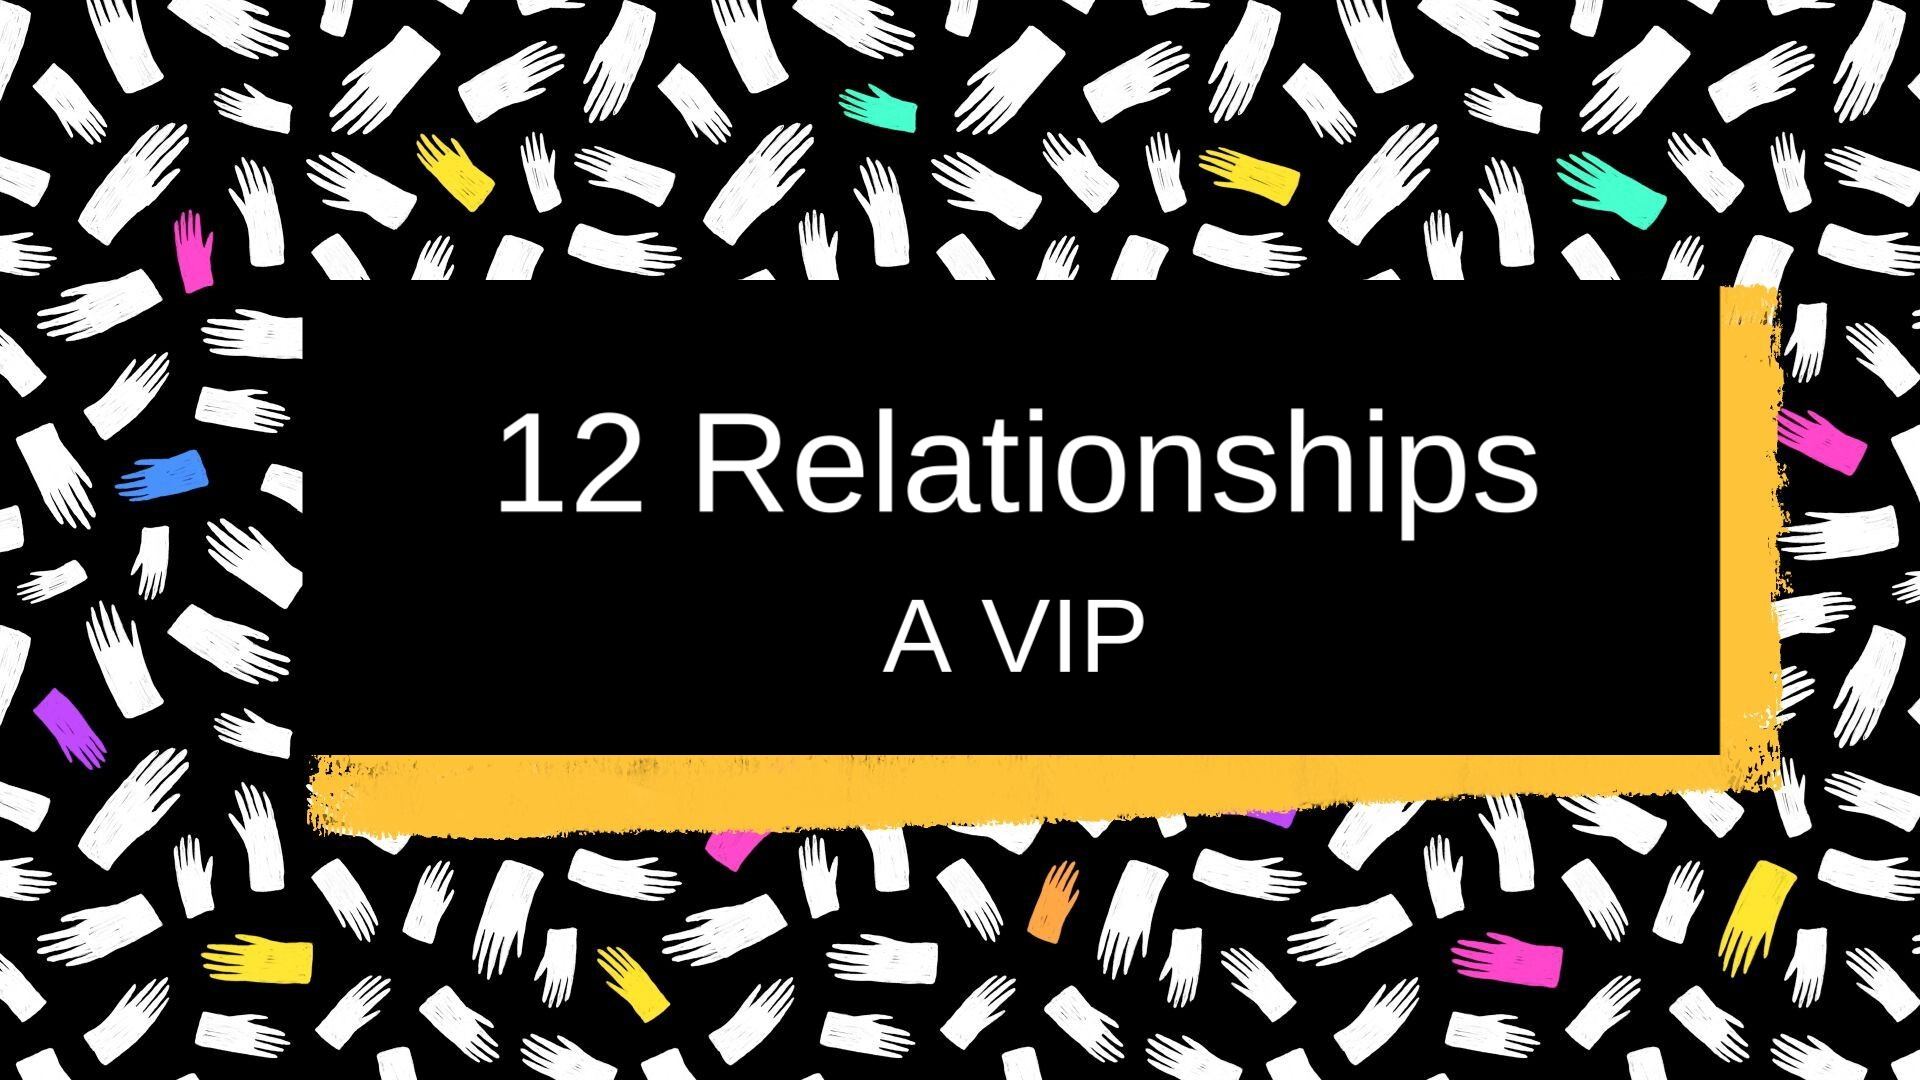 12 Relationships: A VIP